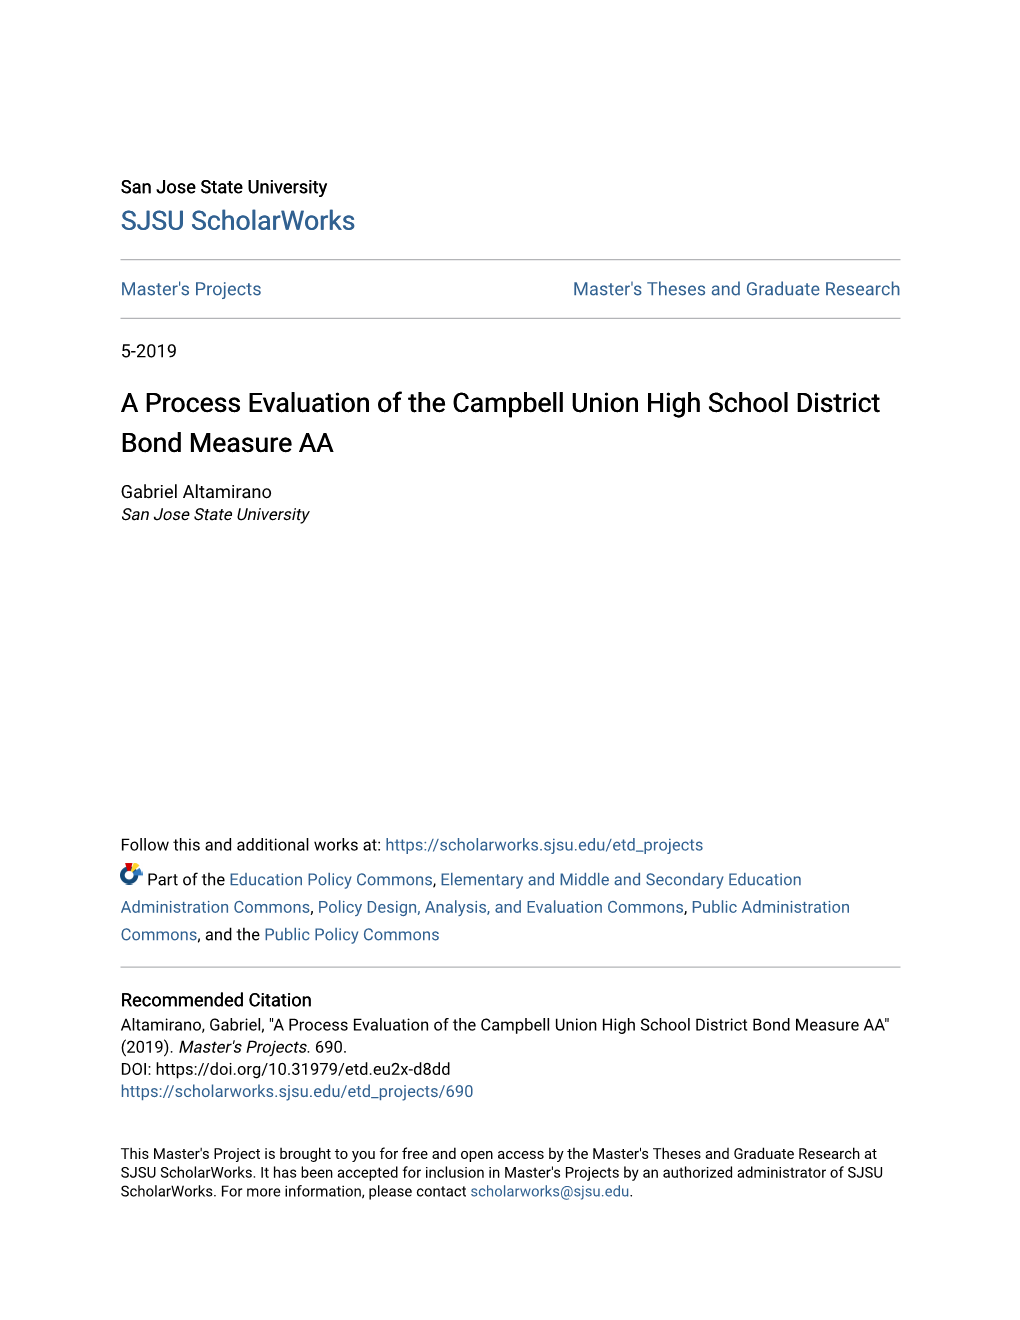 A Process Evaluation of the Campbell Union High School District Bond Measure AA